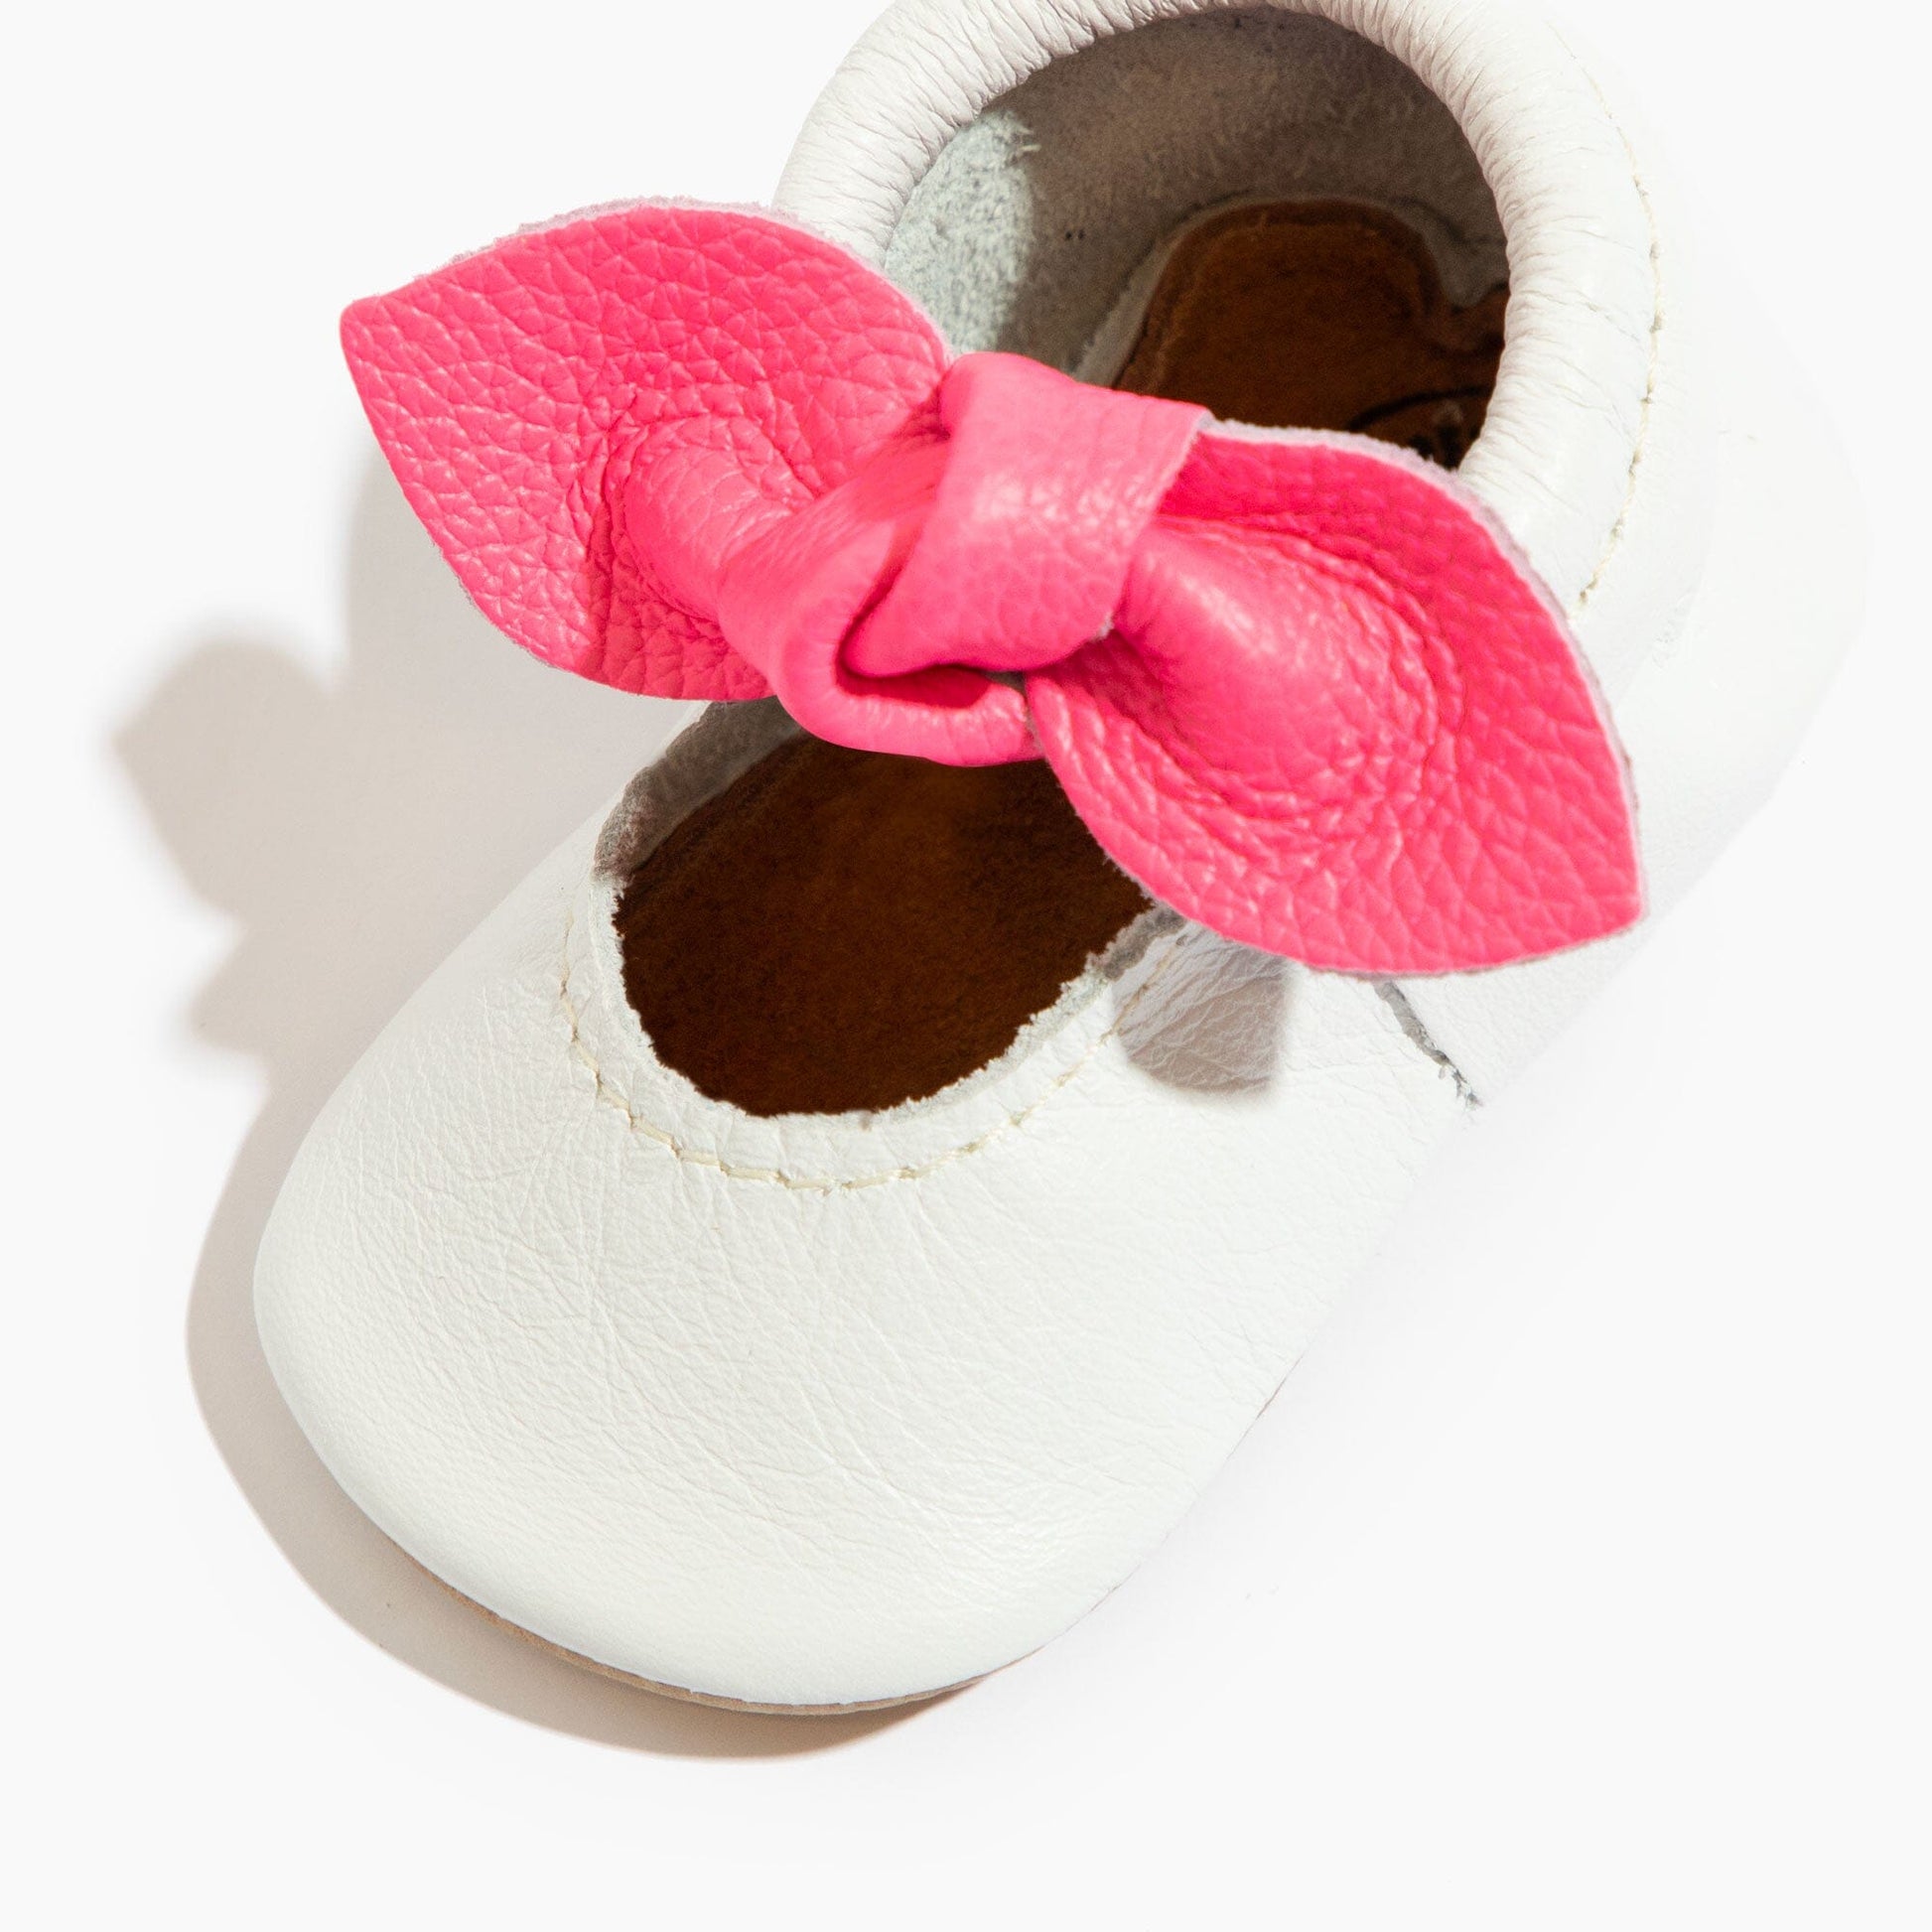 Taffy Dreamhouse Pink Knotted Baby Shoe Knotted Bow Mocc Soft Sole 